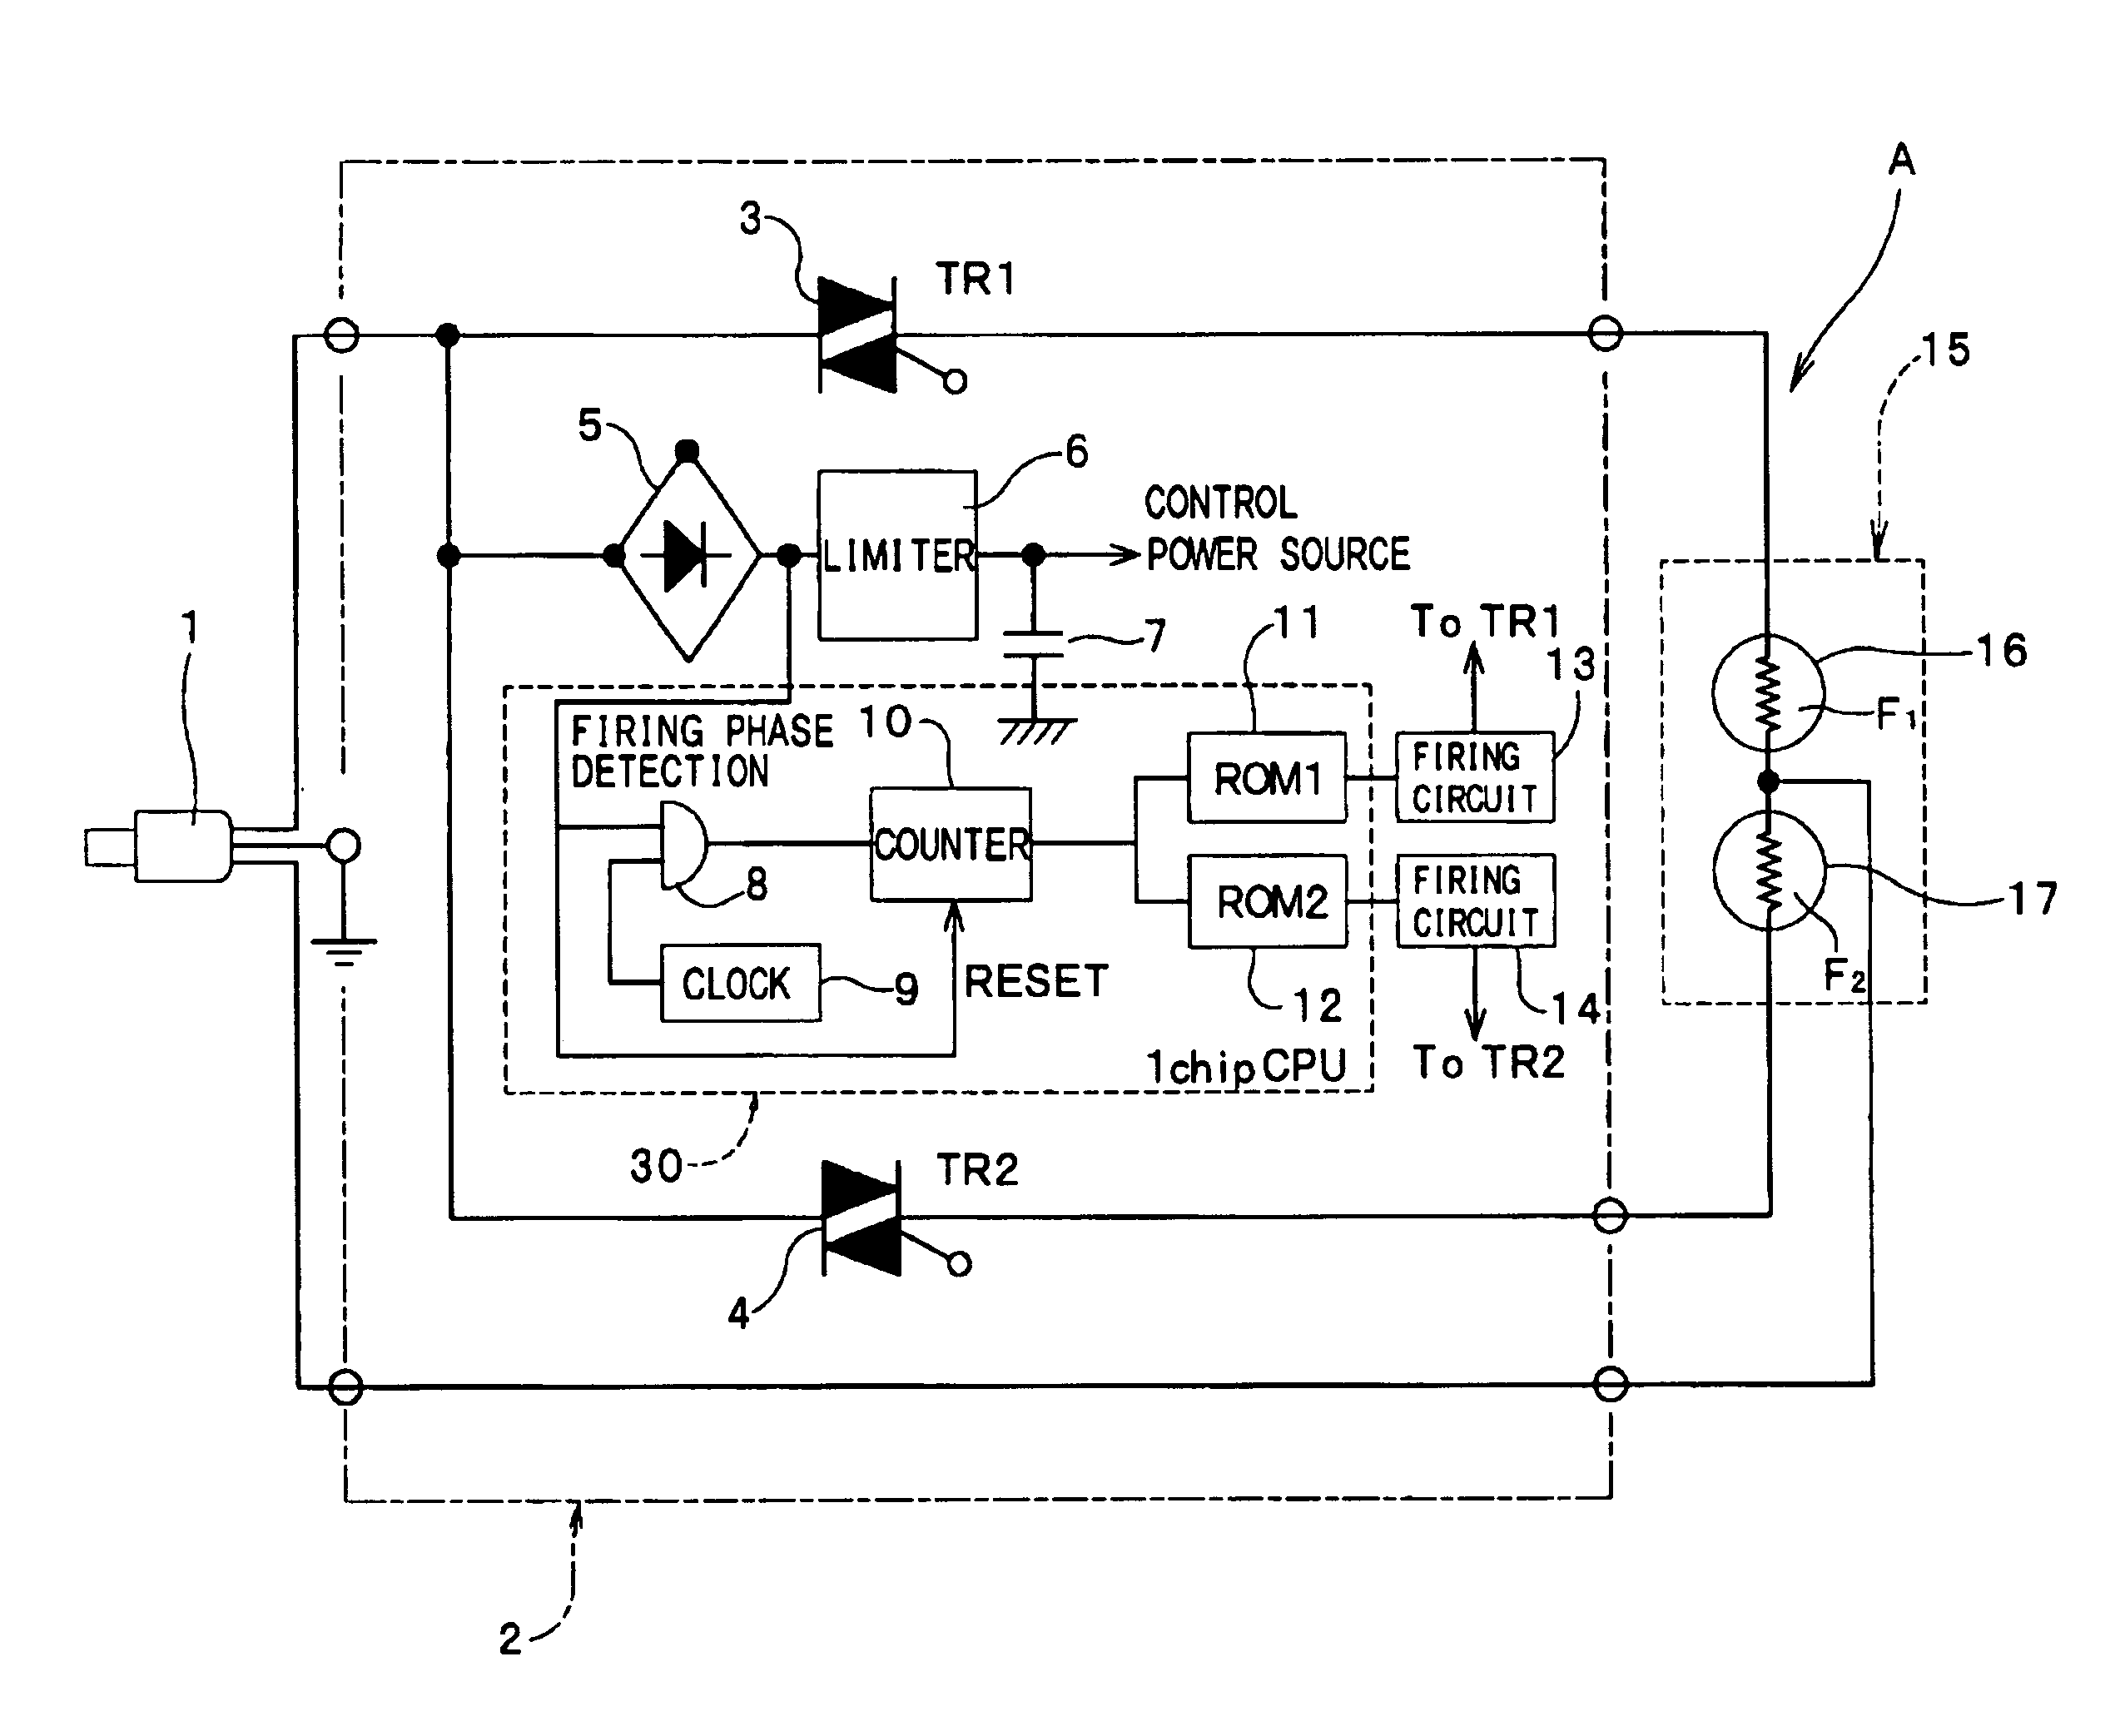 Dimming-control lighting apparatus for incandescent electric lamp